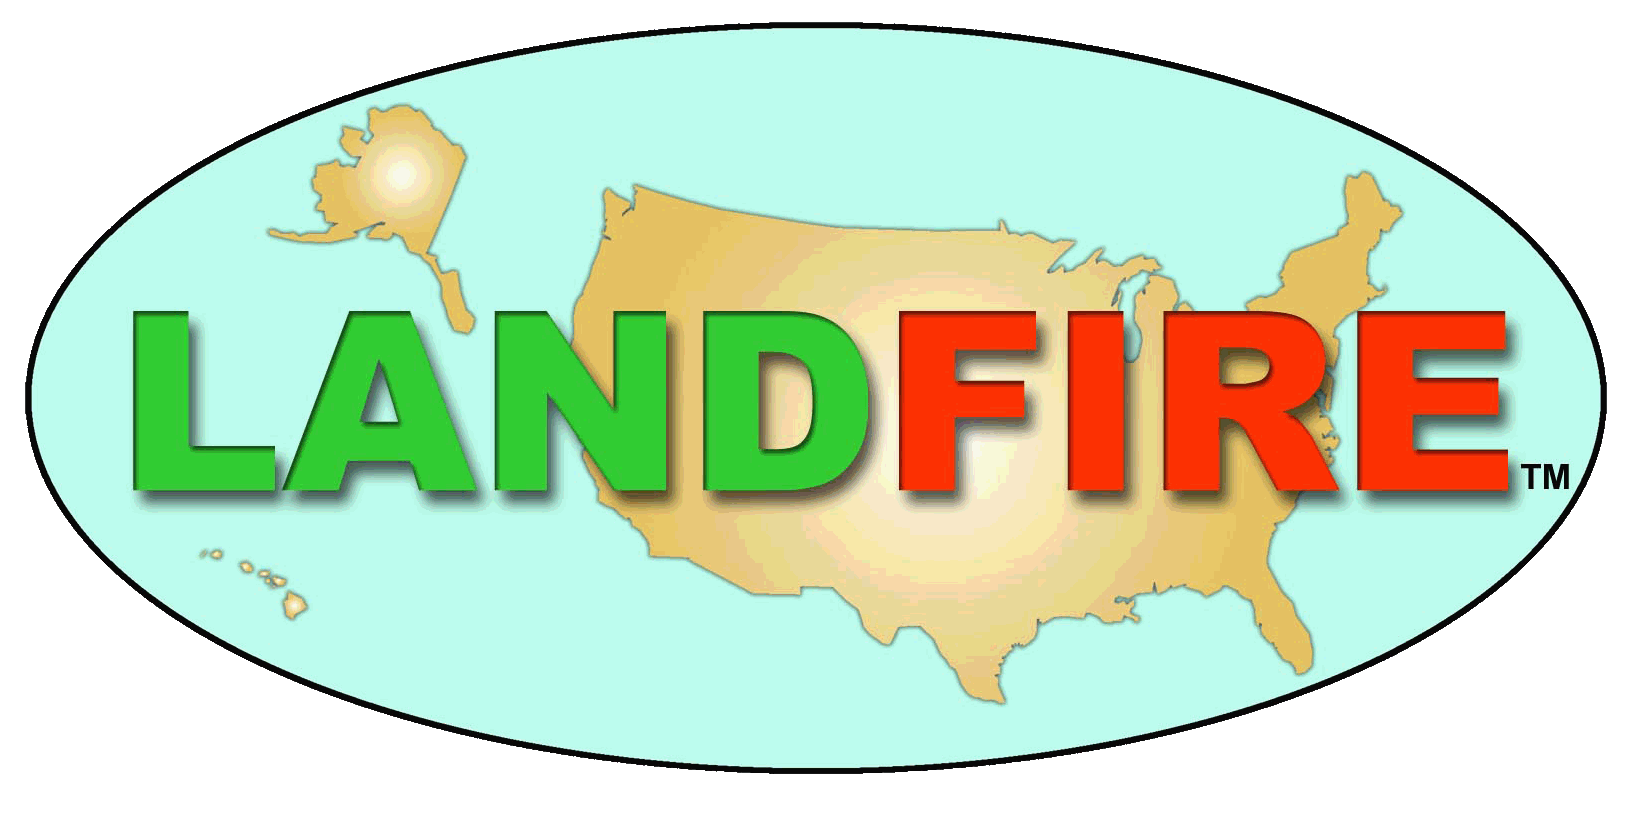 Landfire named environmental dream. Geology clipart scientific observation